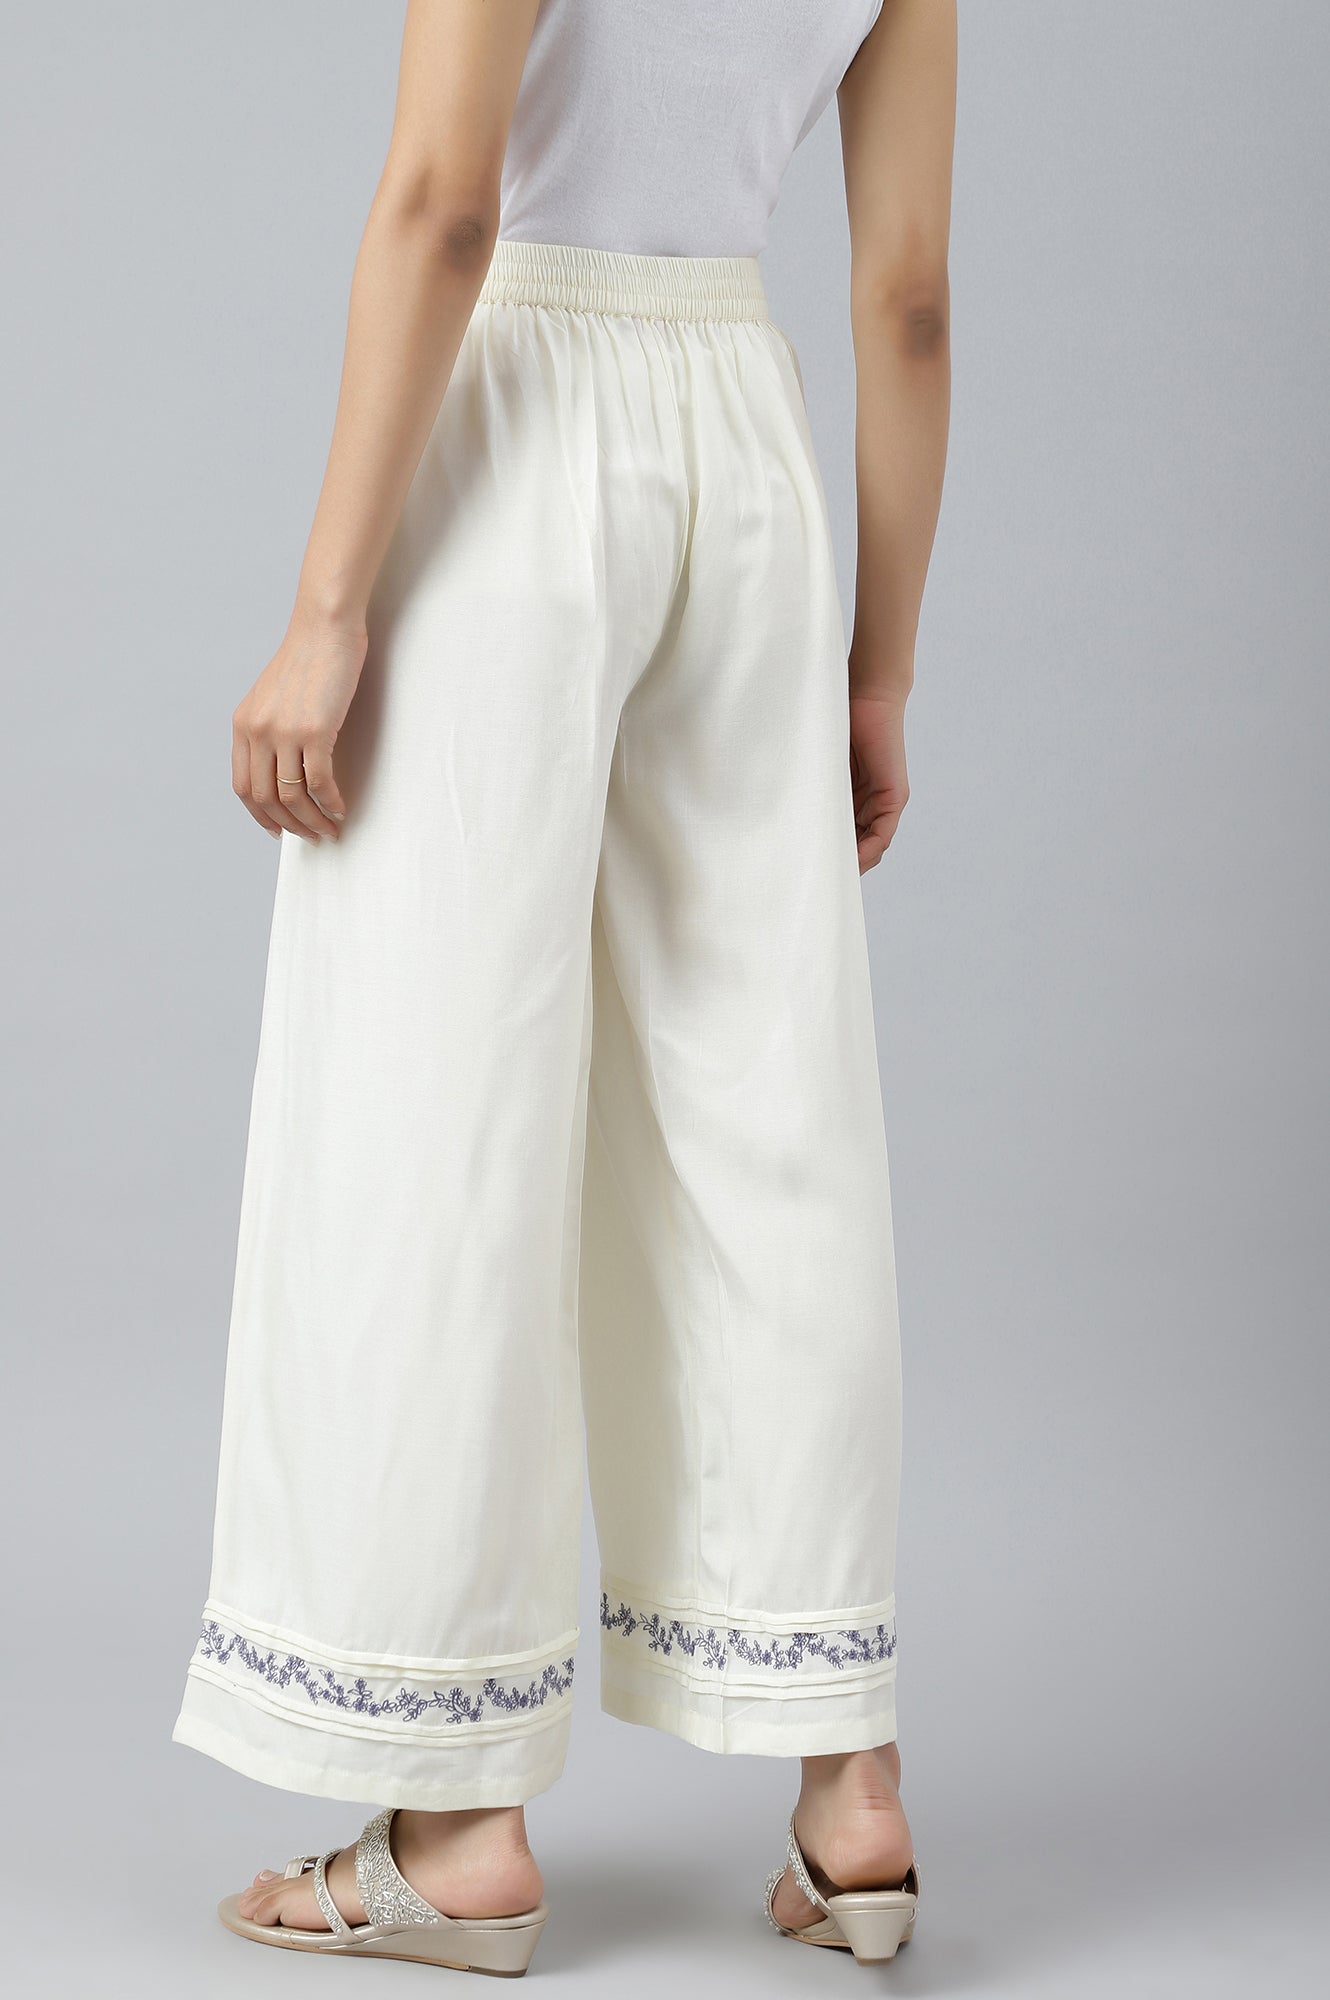 Ecru Embroidered Rayon Parallel Pants With Pleats.